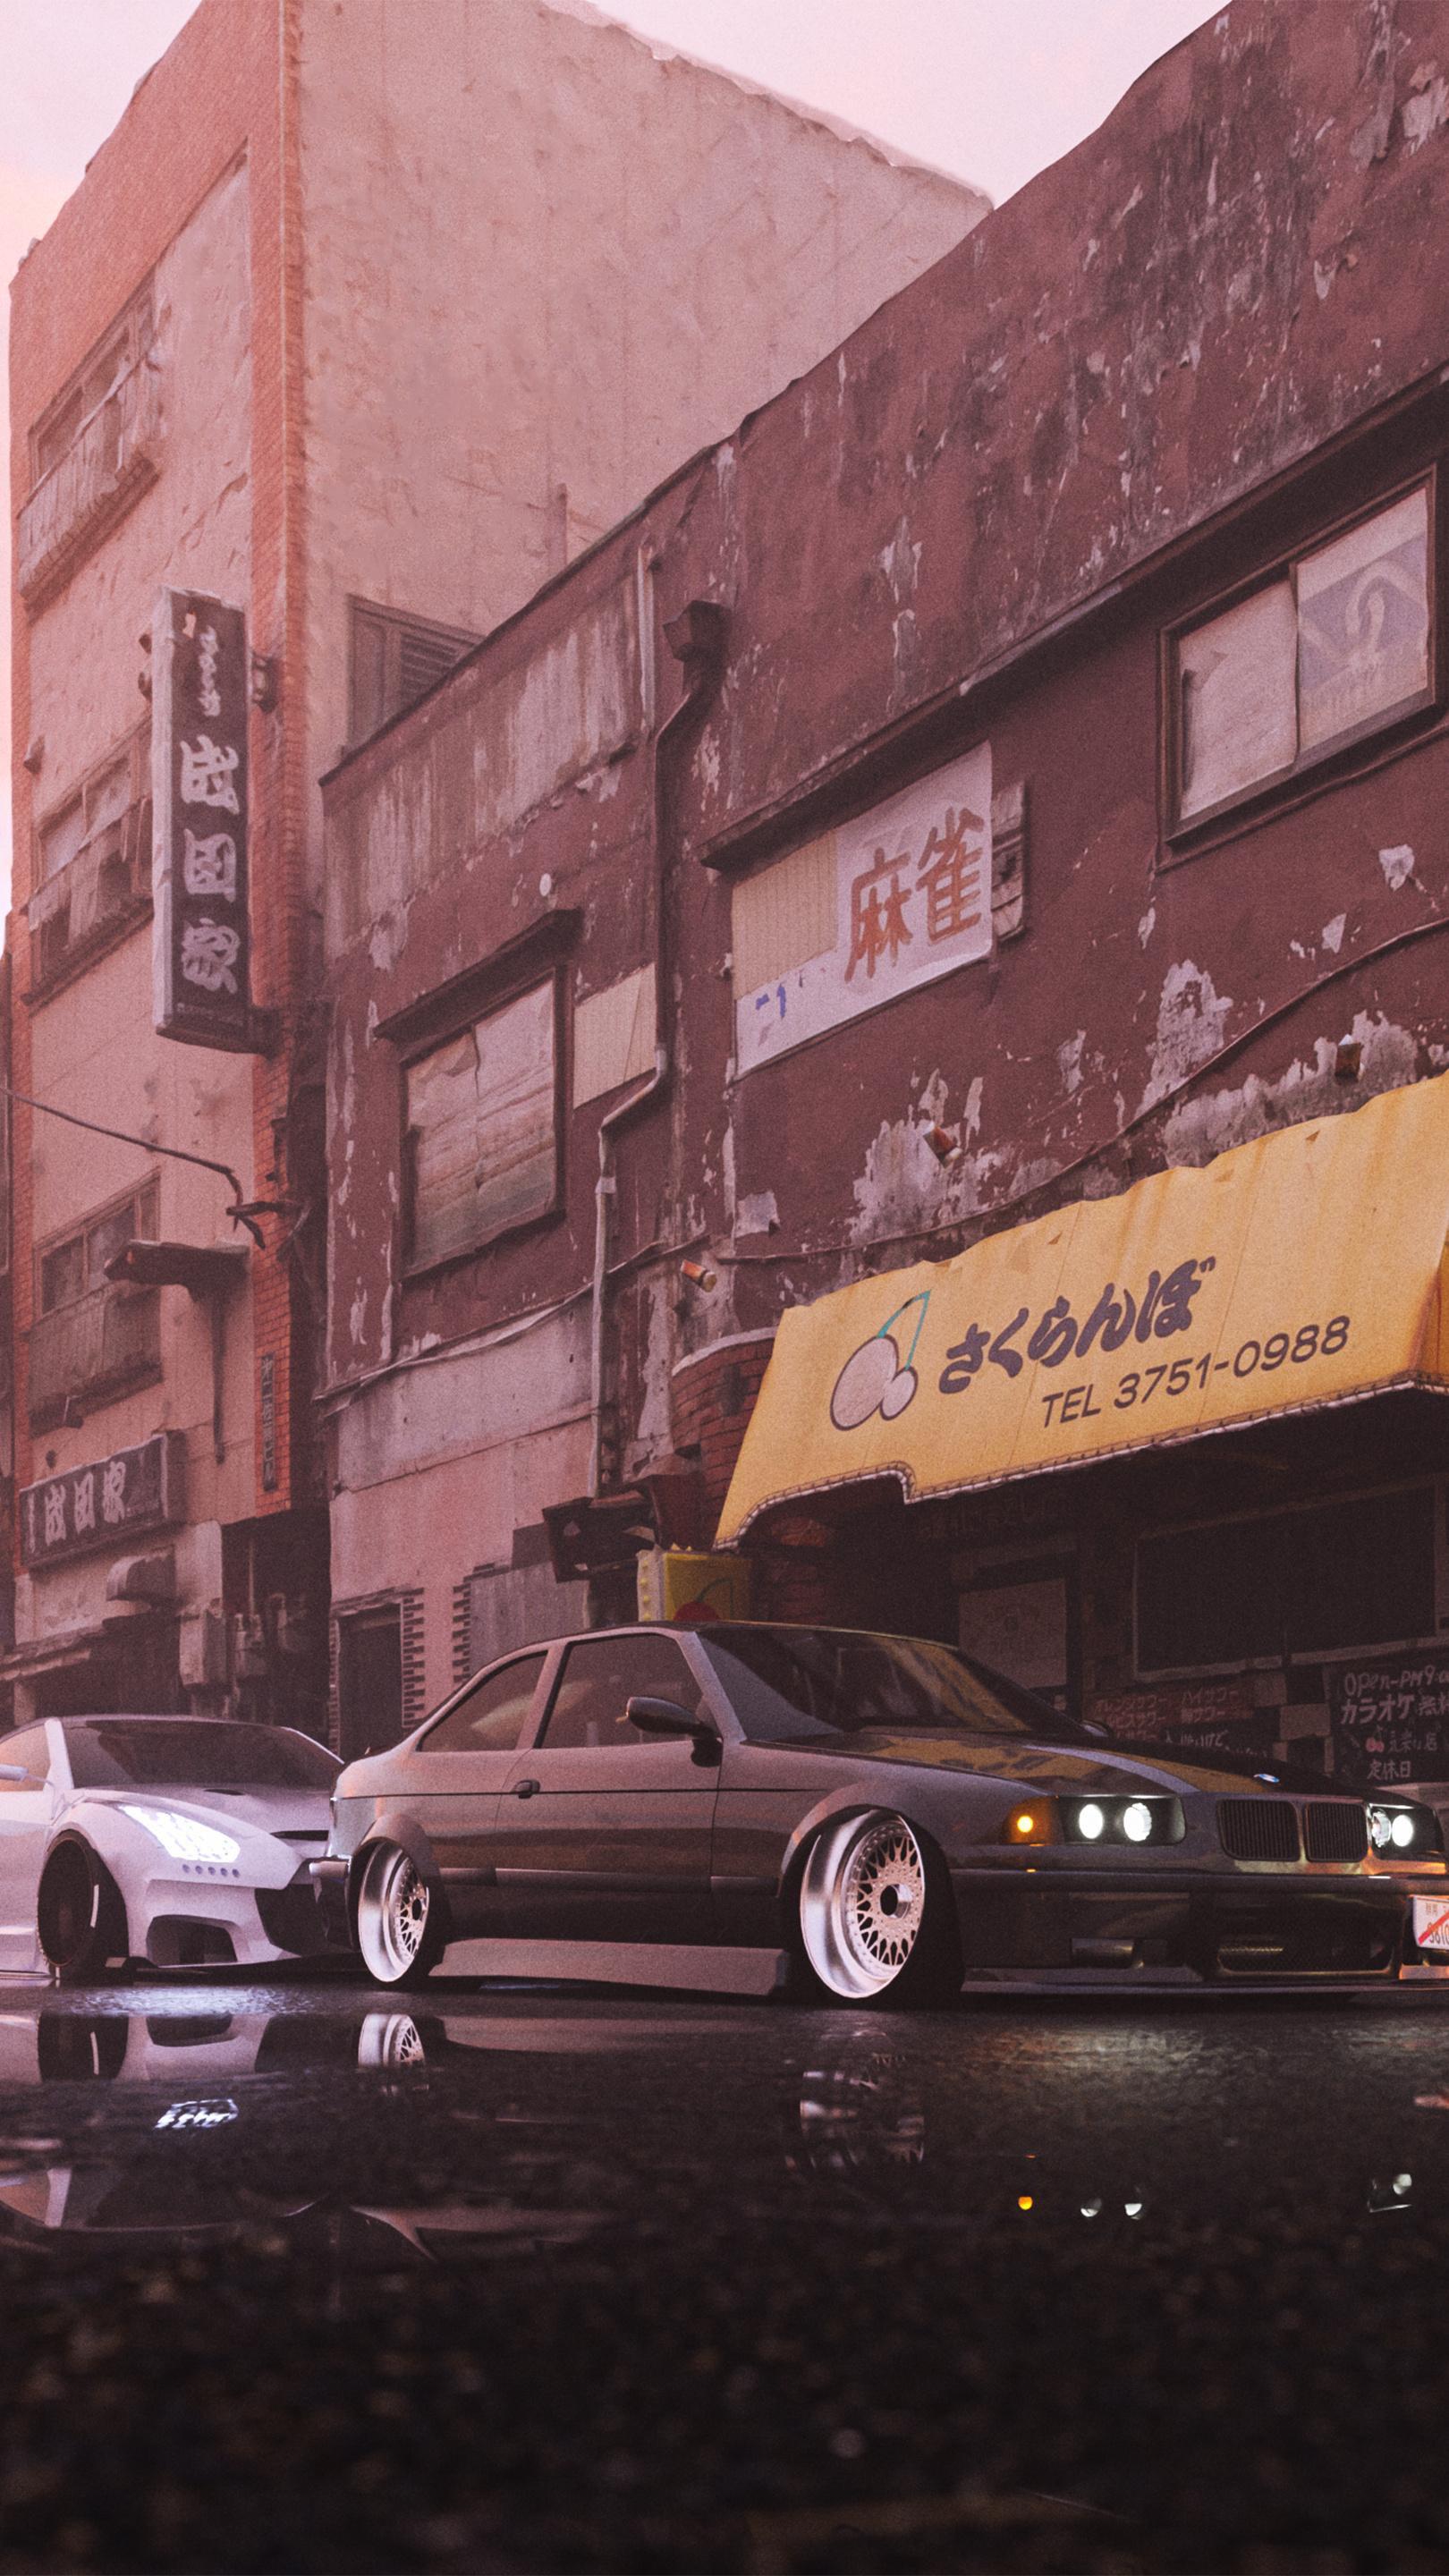 Aesthetic car parked on the street - JDM